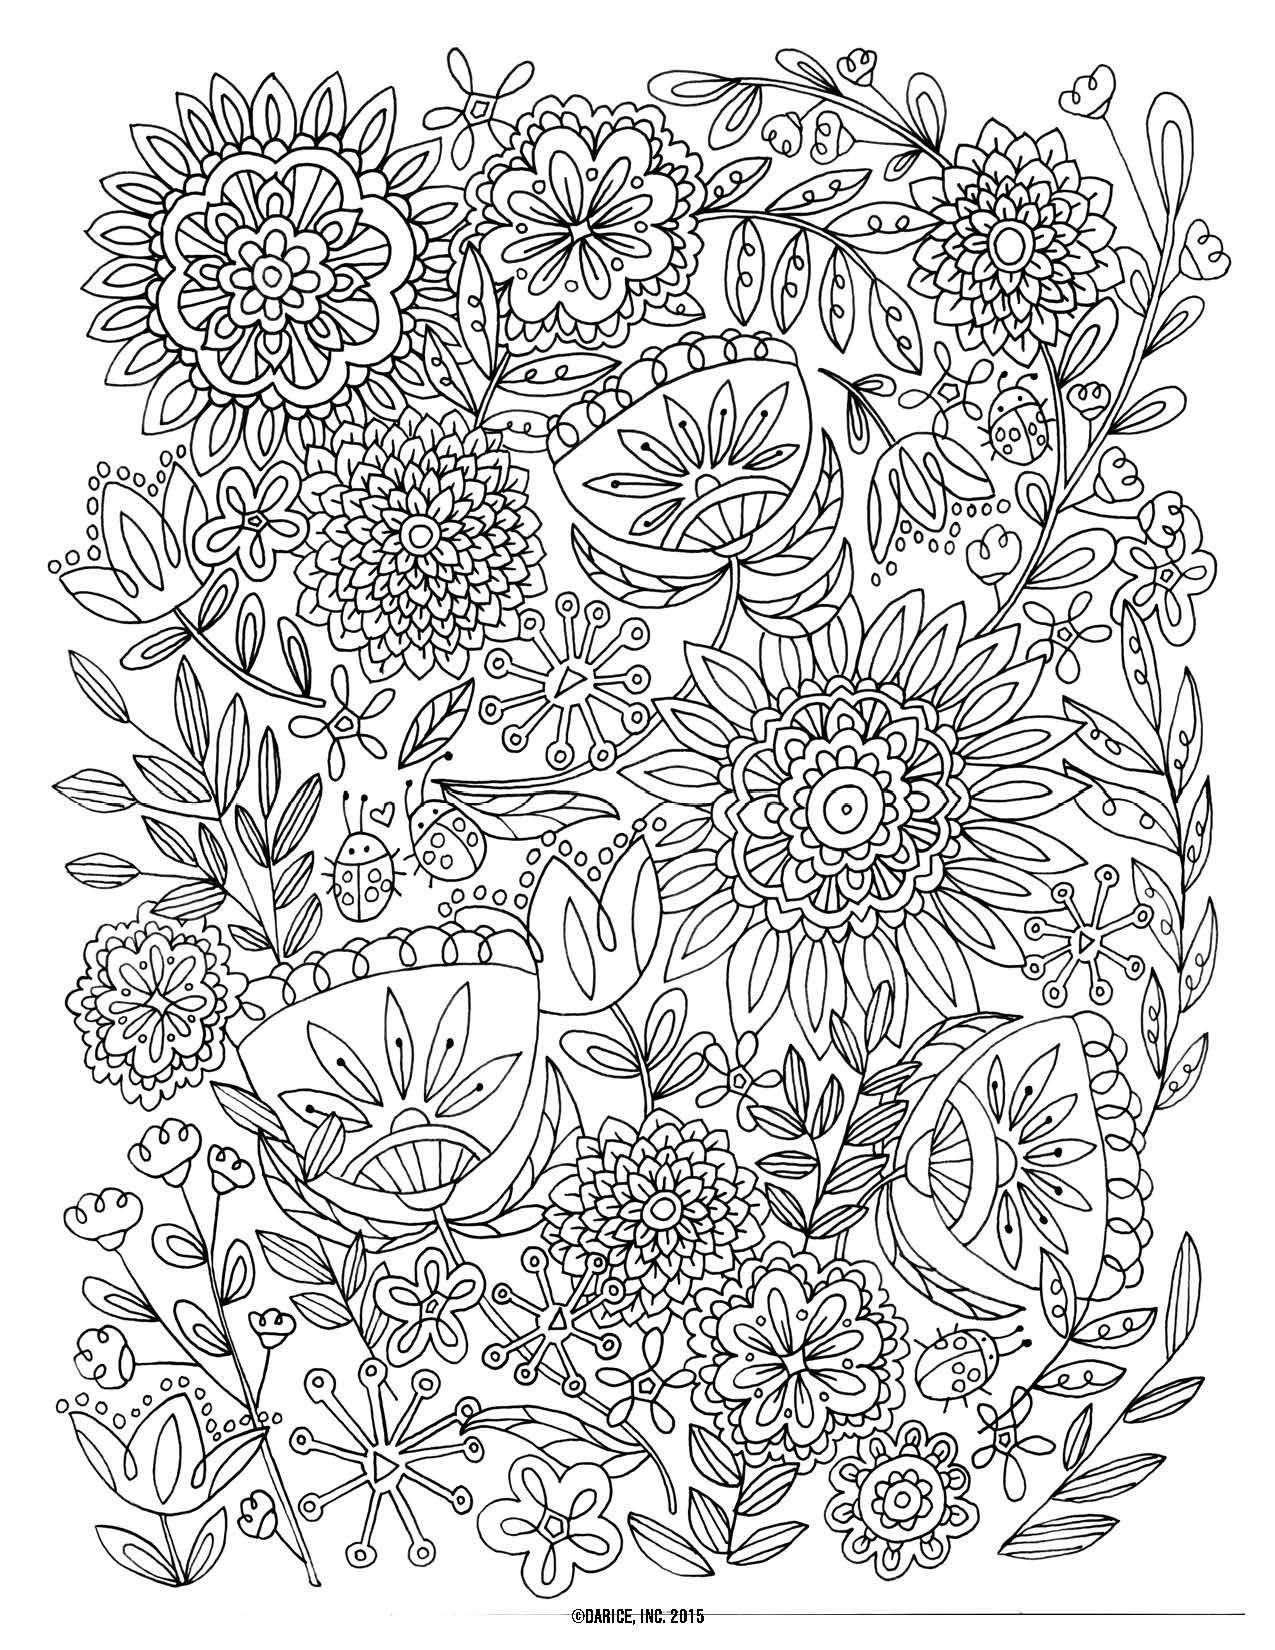 21 Recommended Types Of Vases for Flowers 2024 free download types of vases for flowers of cool vases flower vase coloring page pages flowers in a top i 0d pertaining to coloring printables free coloring pages printables cool vases flower vase colorin